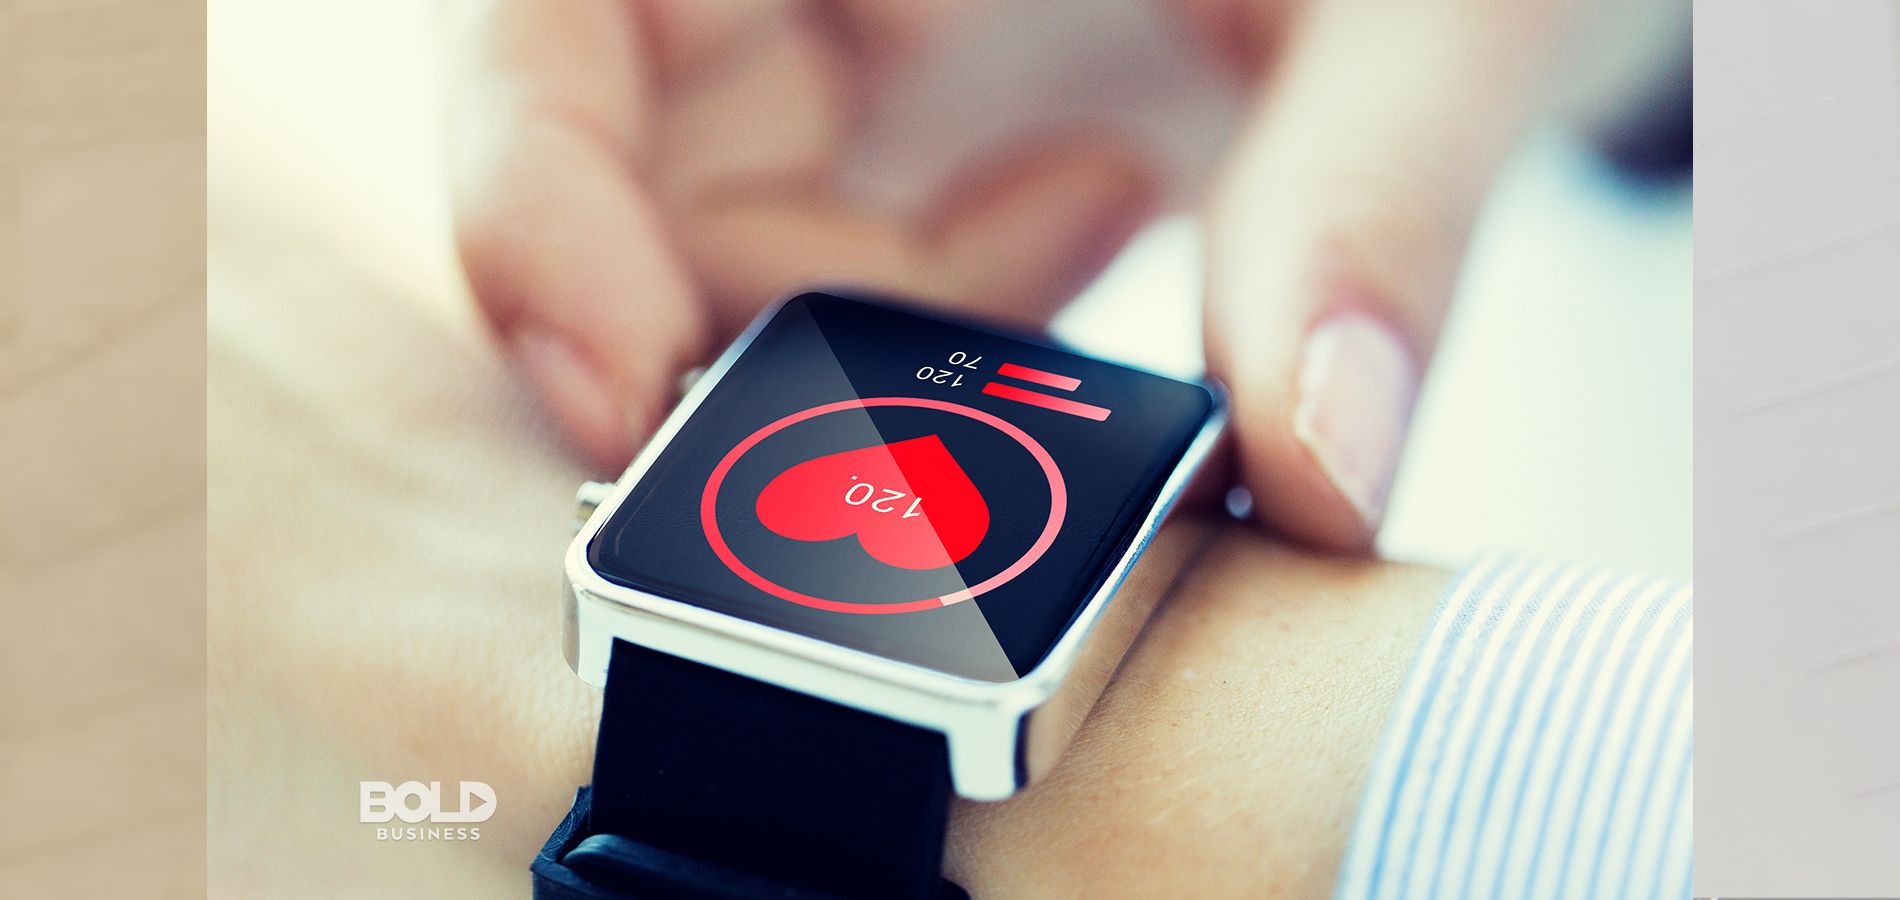 Wearable Technology for Healthcare